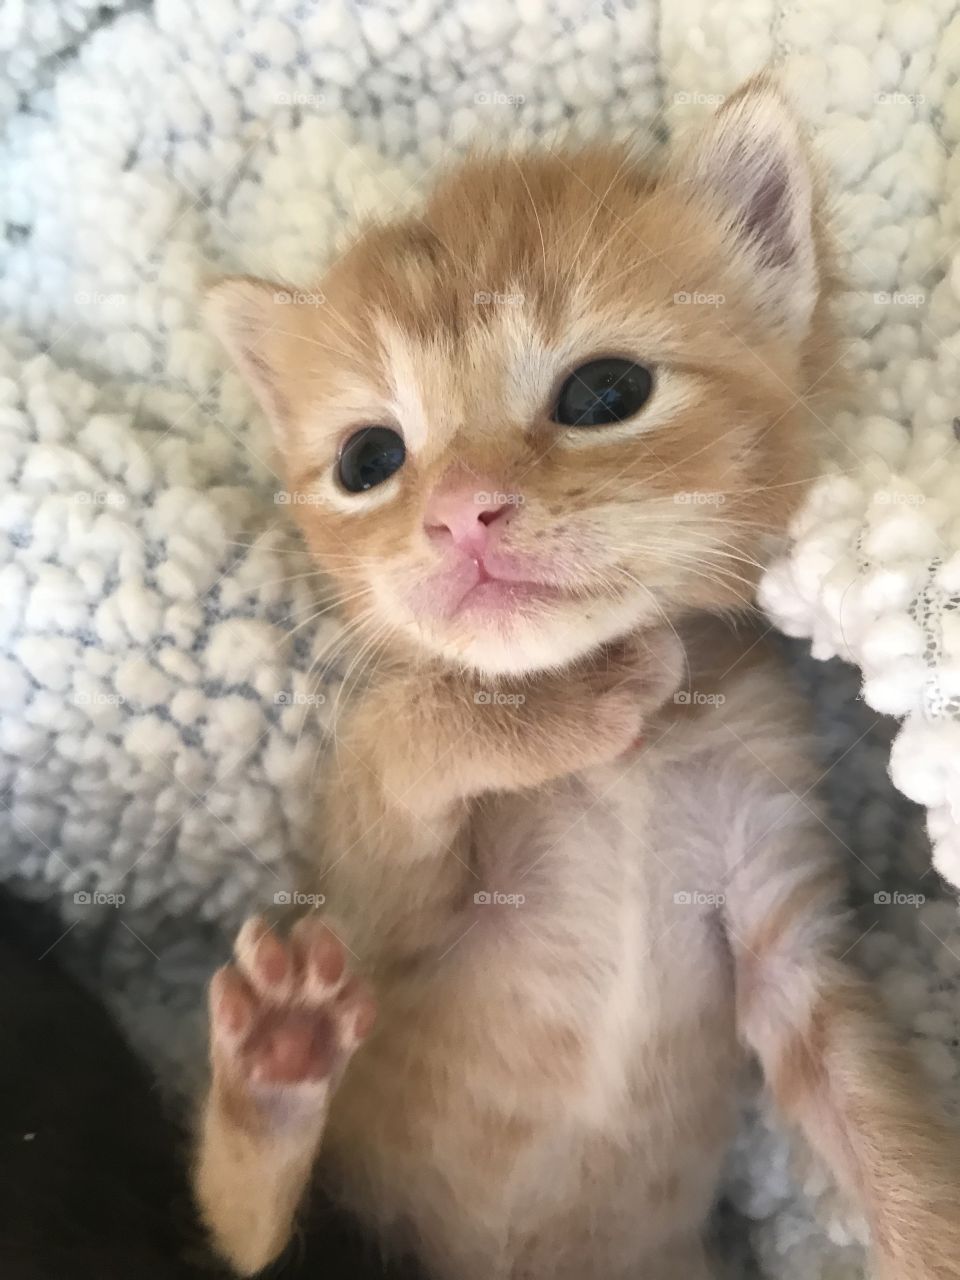 Kittens born in rescue - this sweet little boy will find his forever home